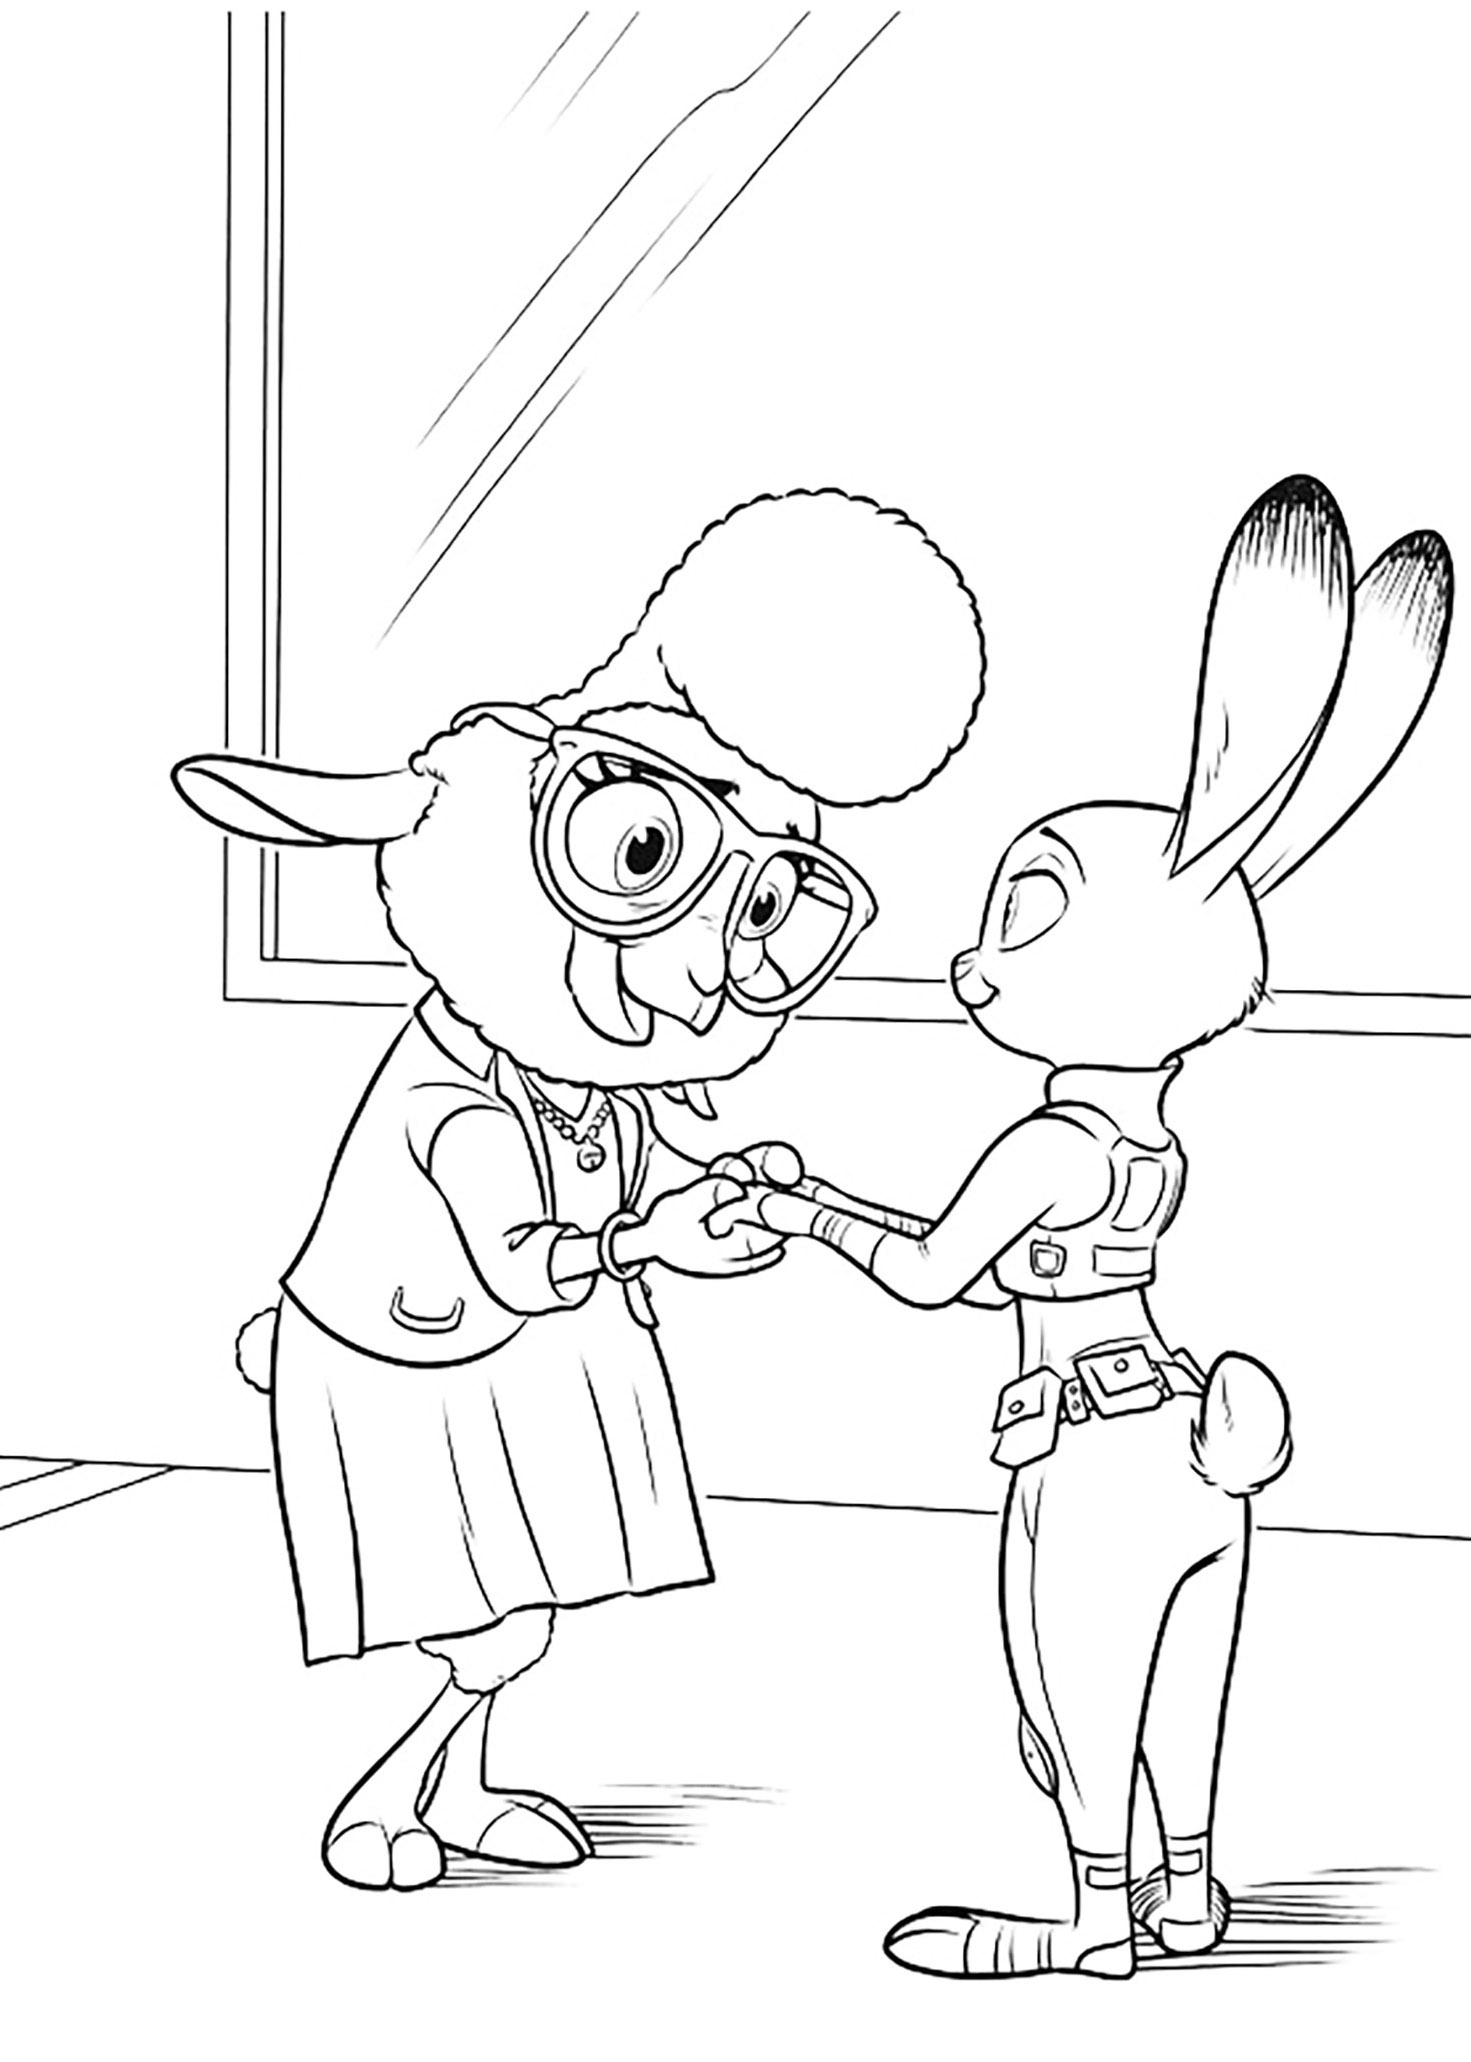 Zootopia for kids   Zootopia Kids Coloring Pages